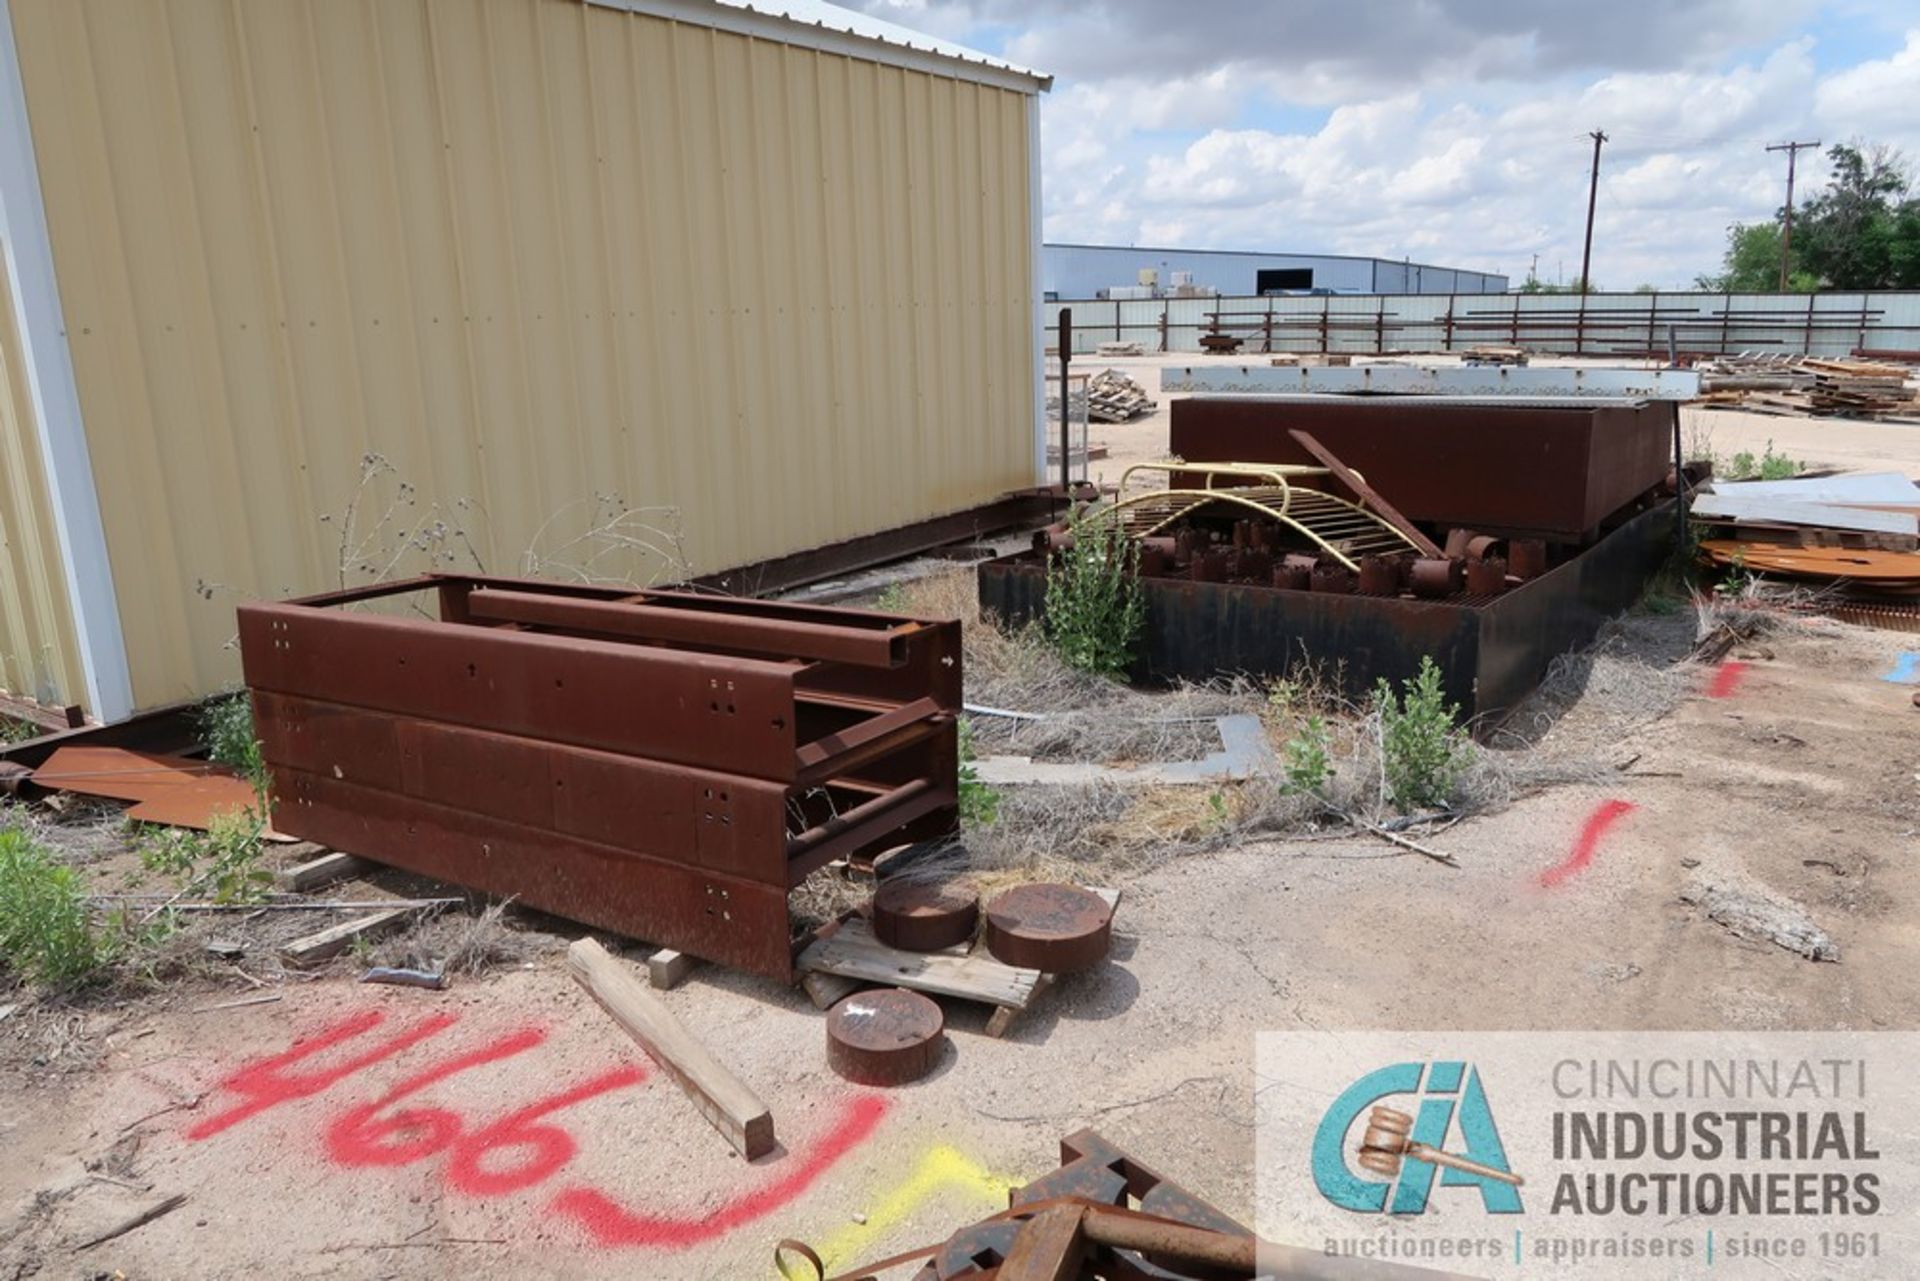 (LOT) (2) BURN TABLES AND SCRAP METAL (OUTLINED IN RED PAINT)